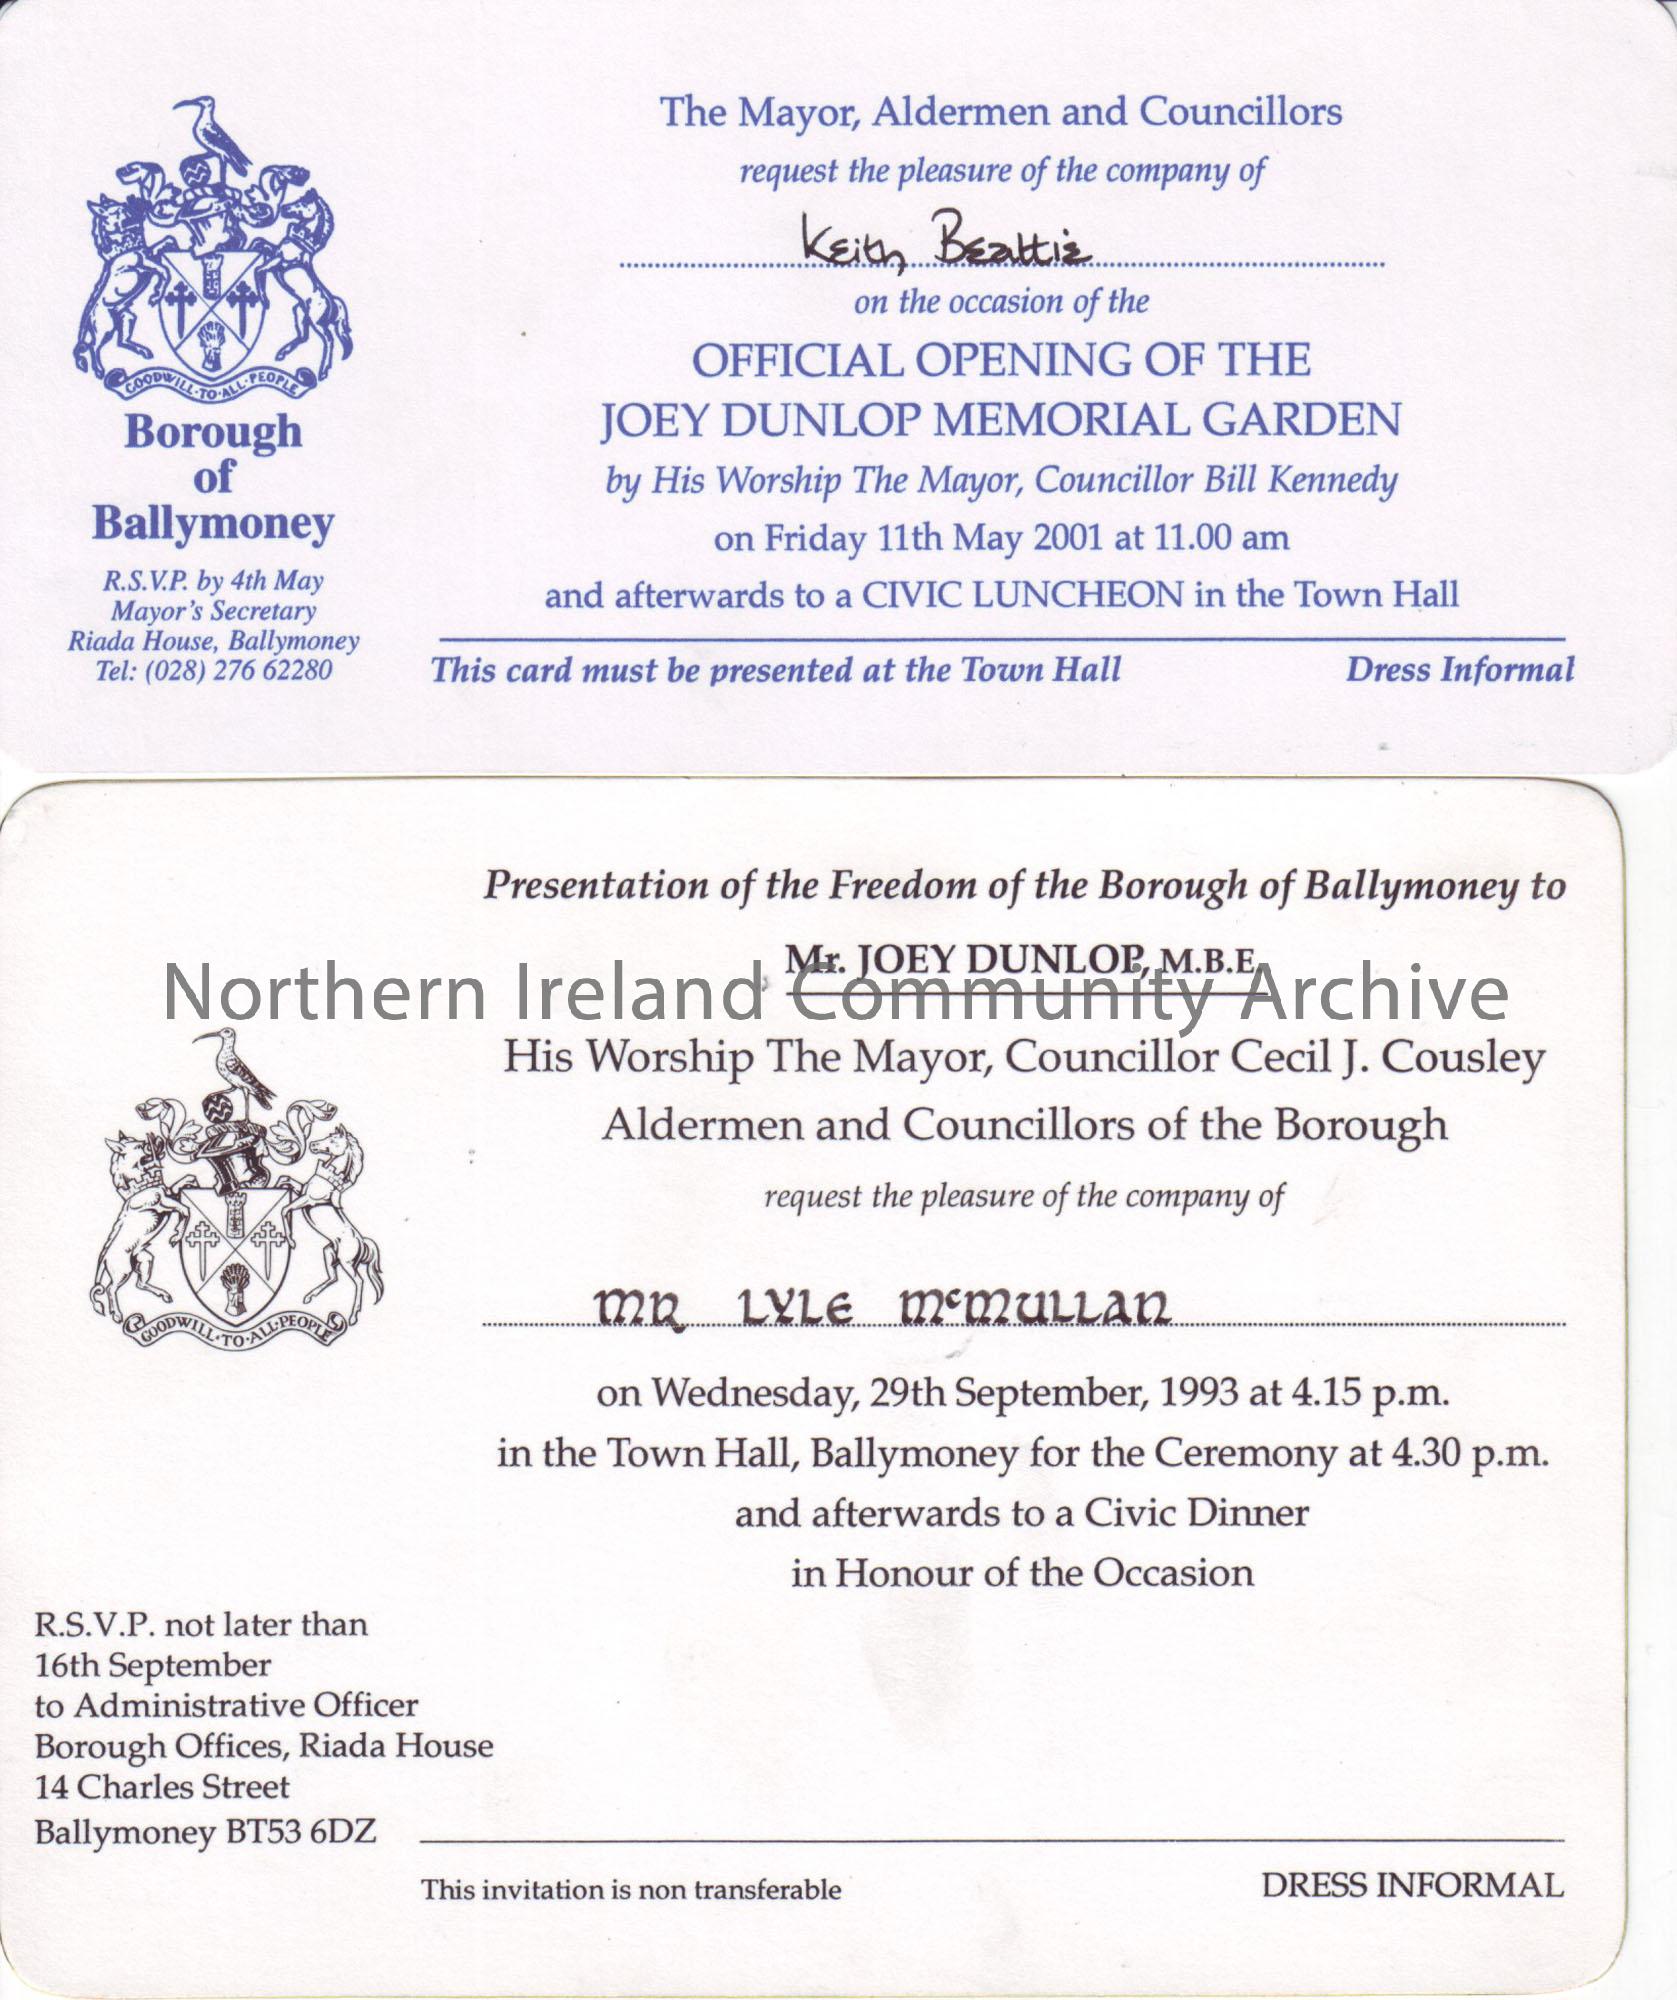 Invitation to Keith Beattie on the occasion of the official opening of the Joey Dunlop Memorial Garden by his worship The Mayor, councillor Bill Kenne…